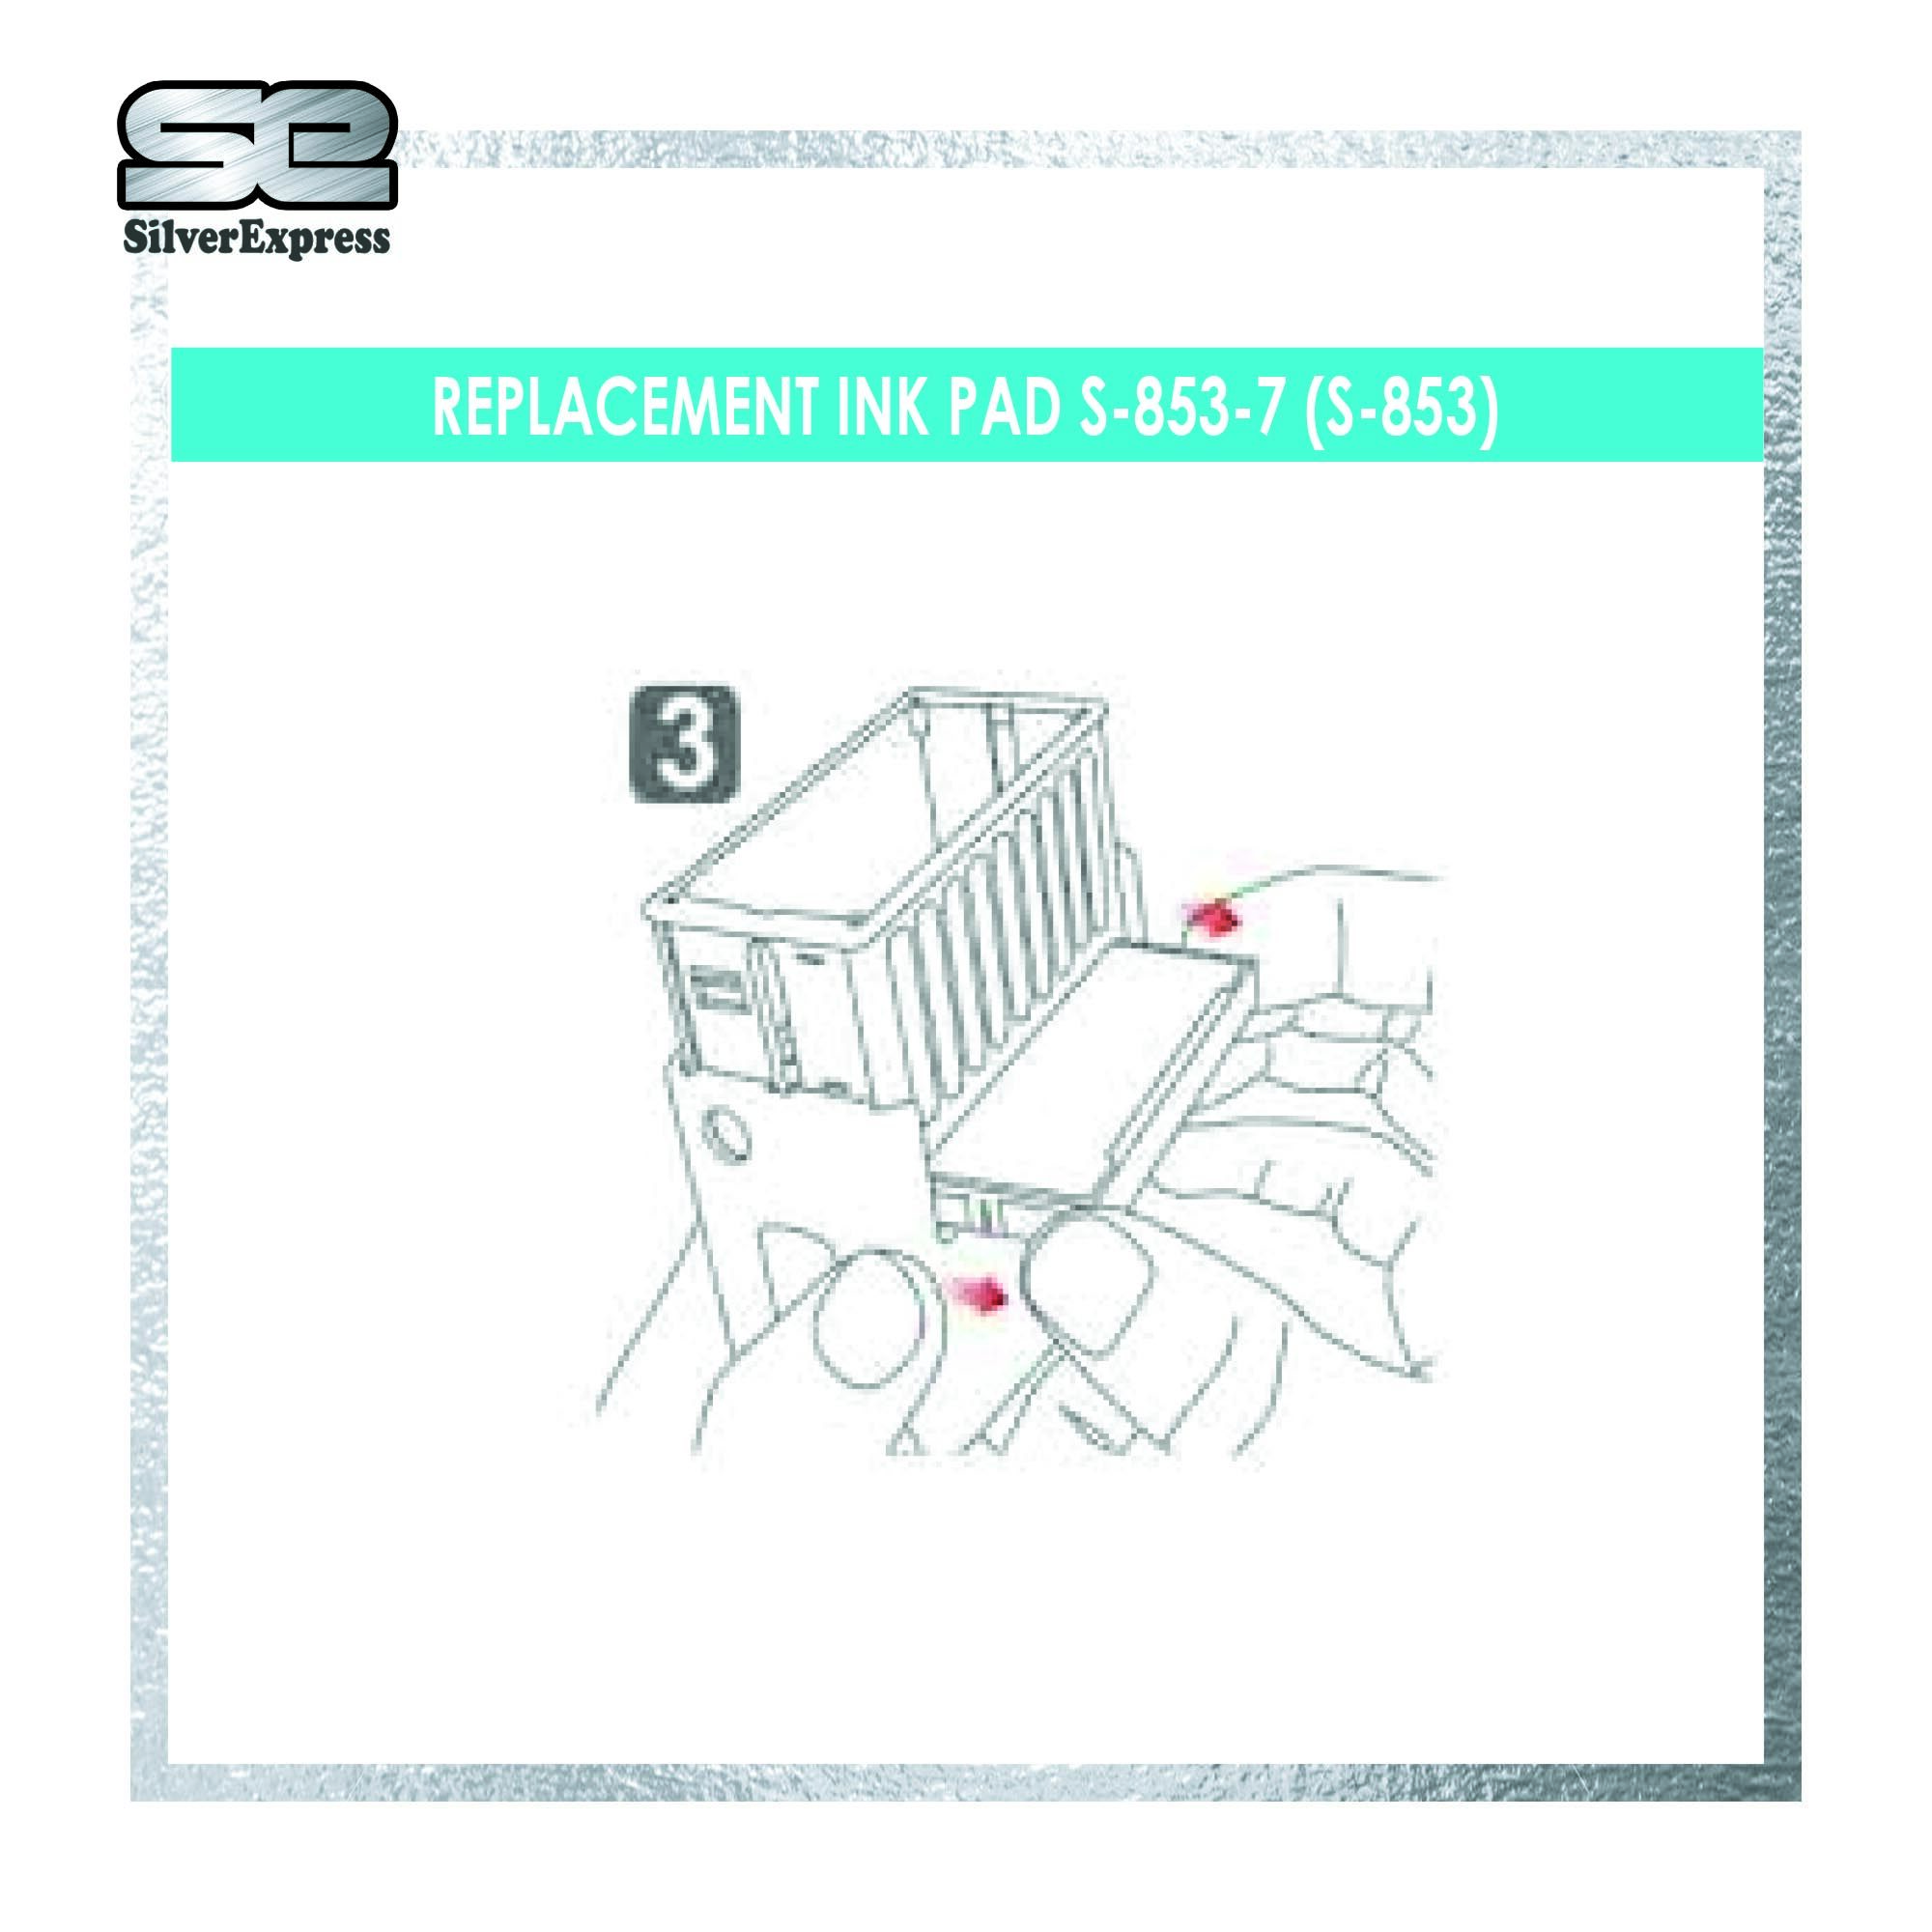 BLACK Replacement Pad S-853-7 for the Shiny 883 Self-inking Stamp 